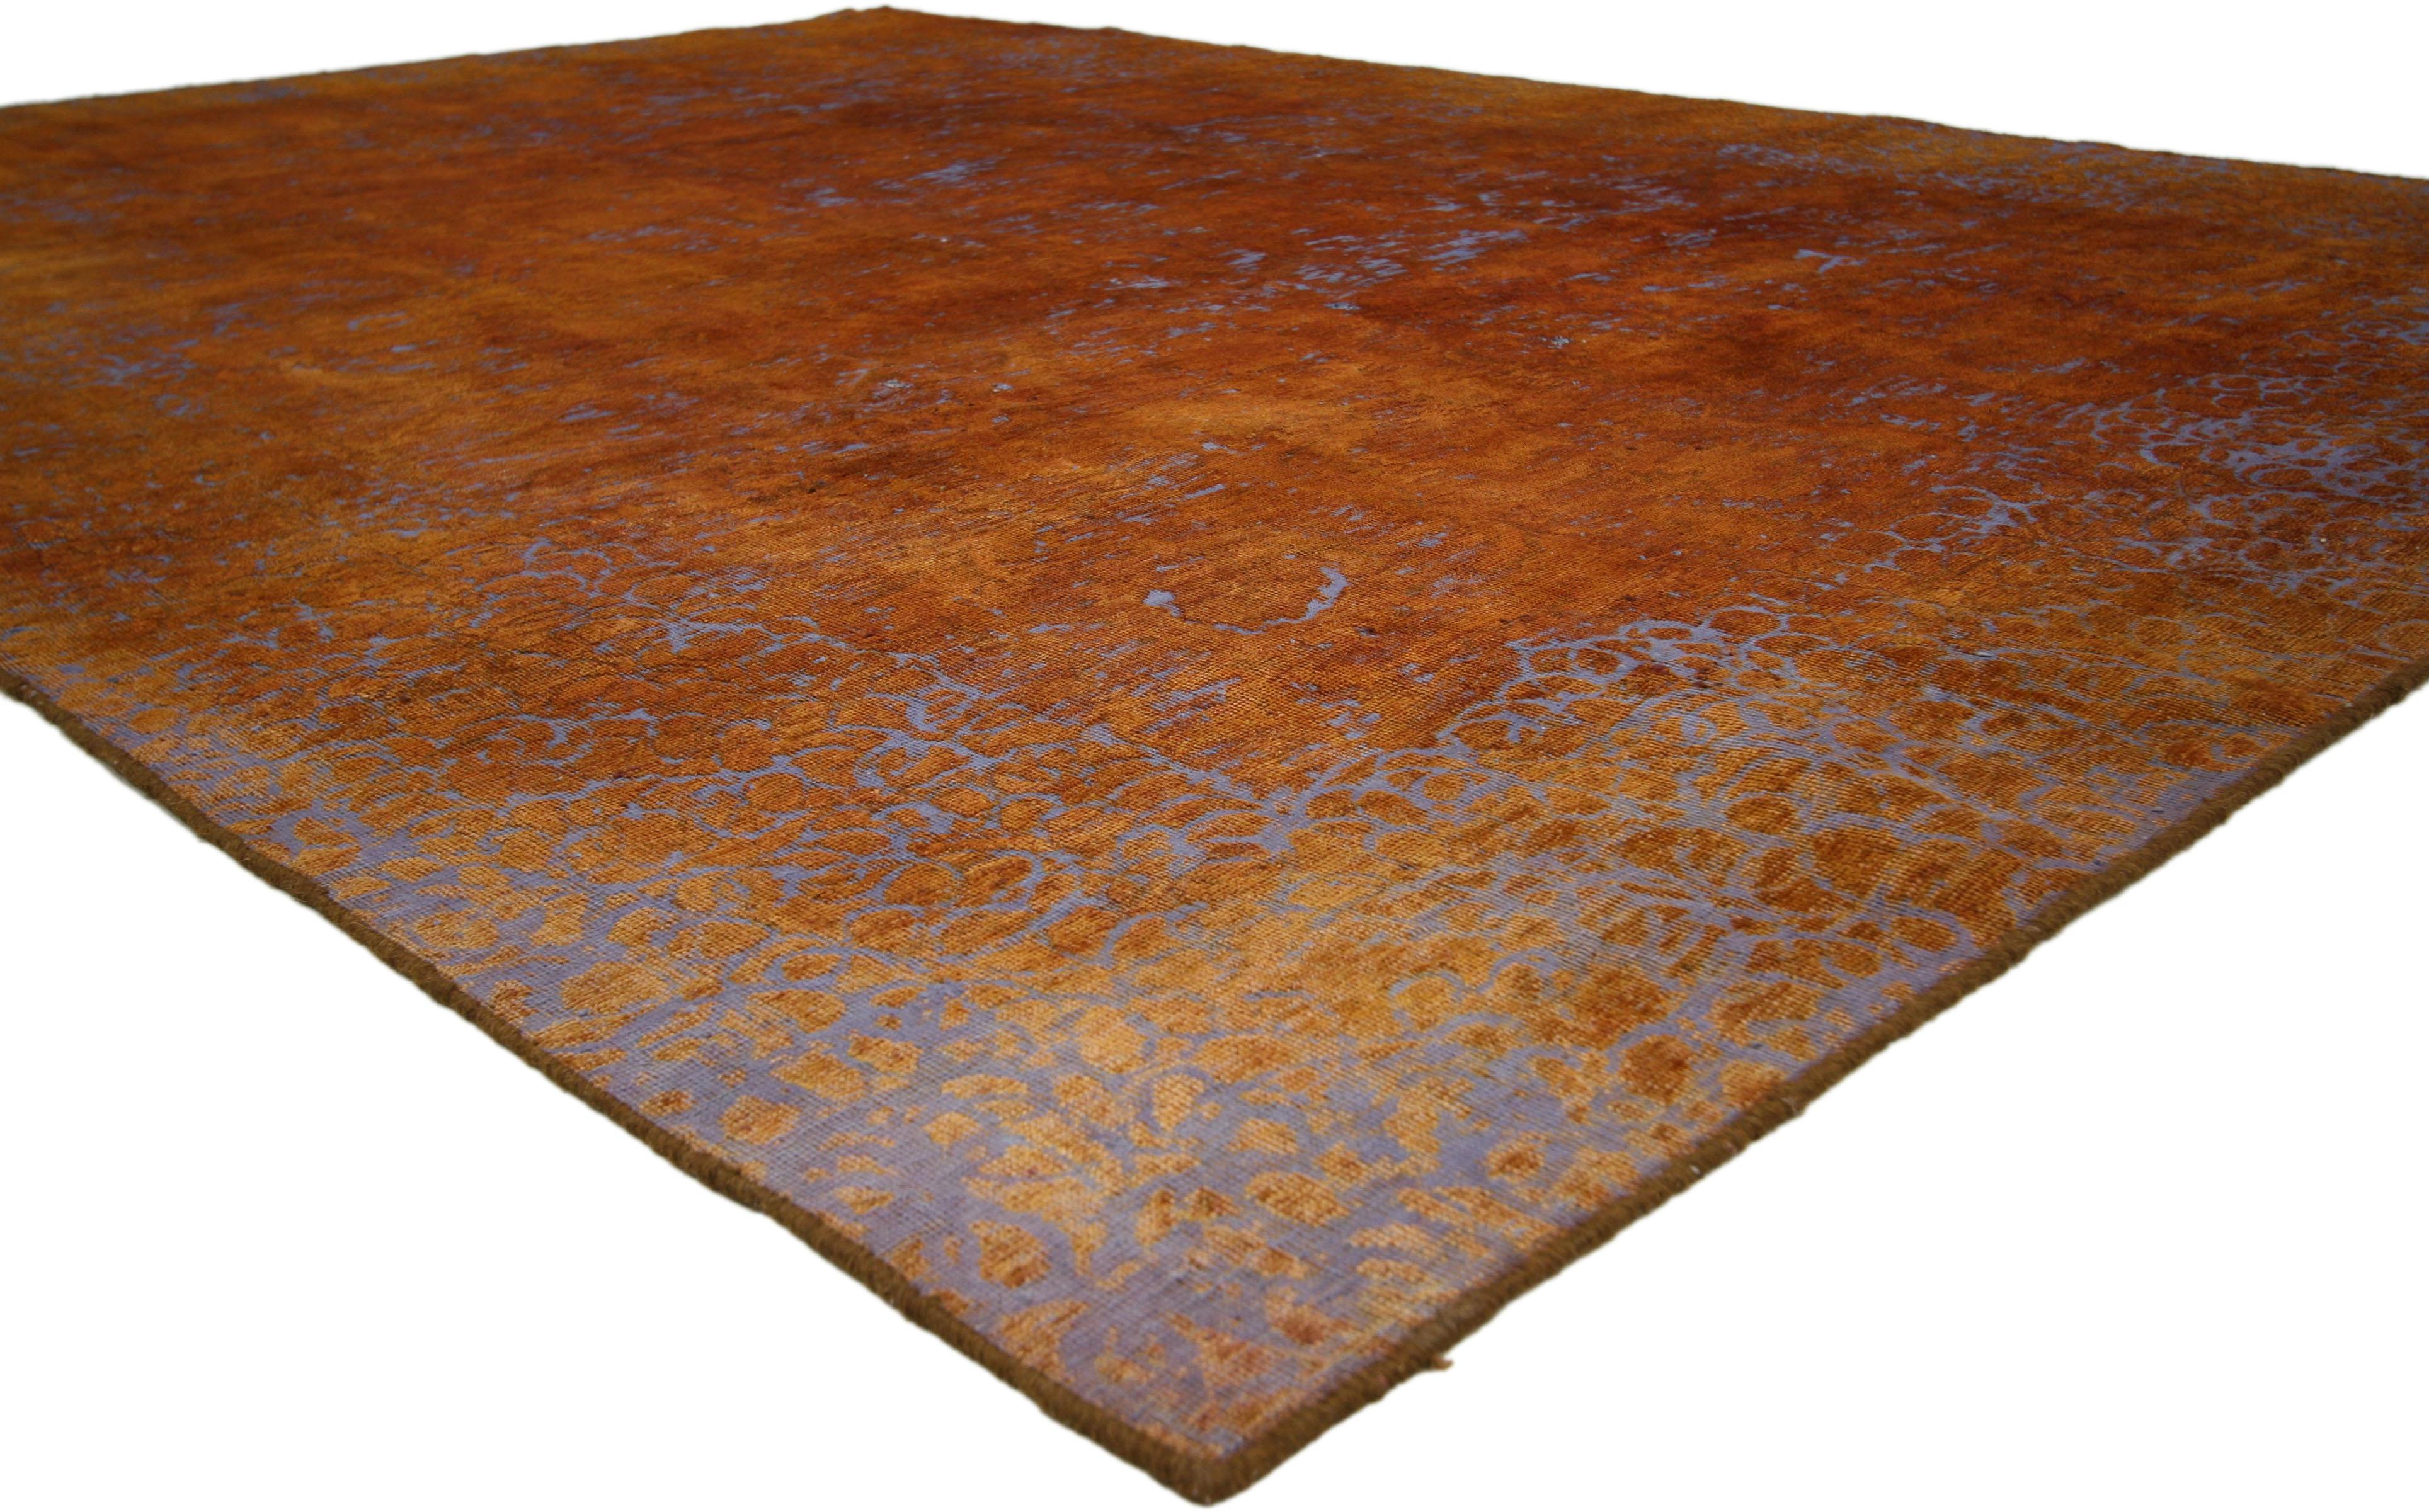 60624 Distressed Vintage Turkish Rug with Mid-Century Modern Northwestern Style 07'08 x 10'07. Imbued with vibrant orange earthy hues and rustic sensibility, this hand-knotted wool distressed vintage Turkish rug will take on a curated lived-in look